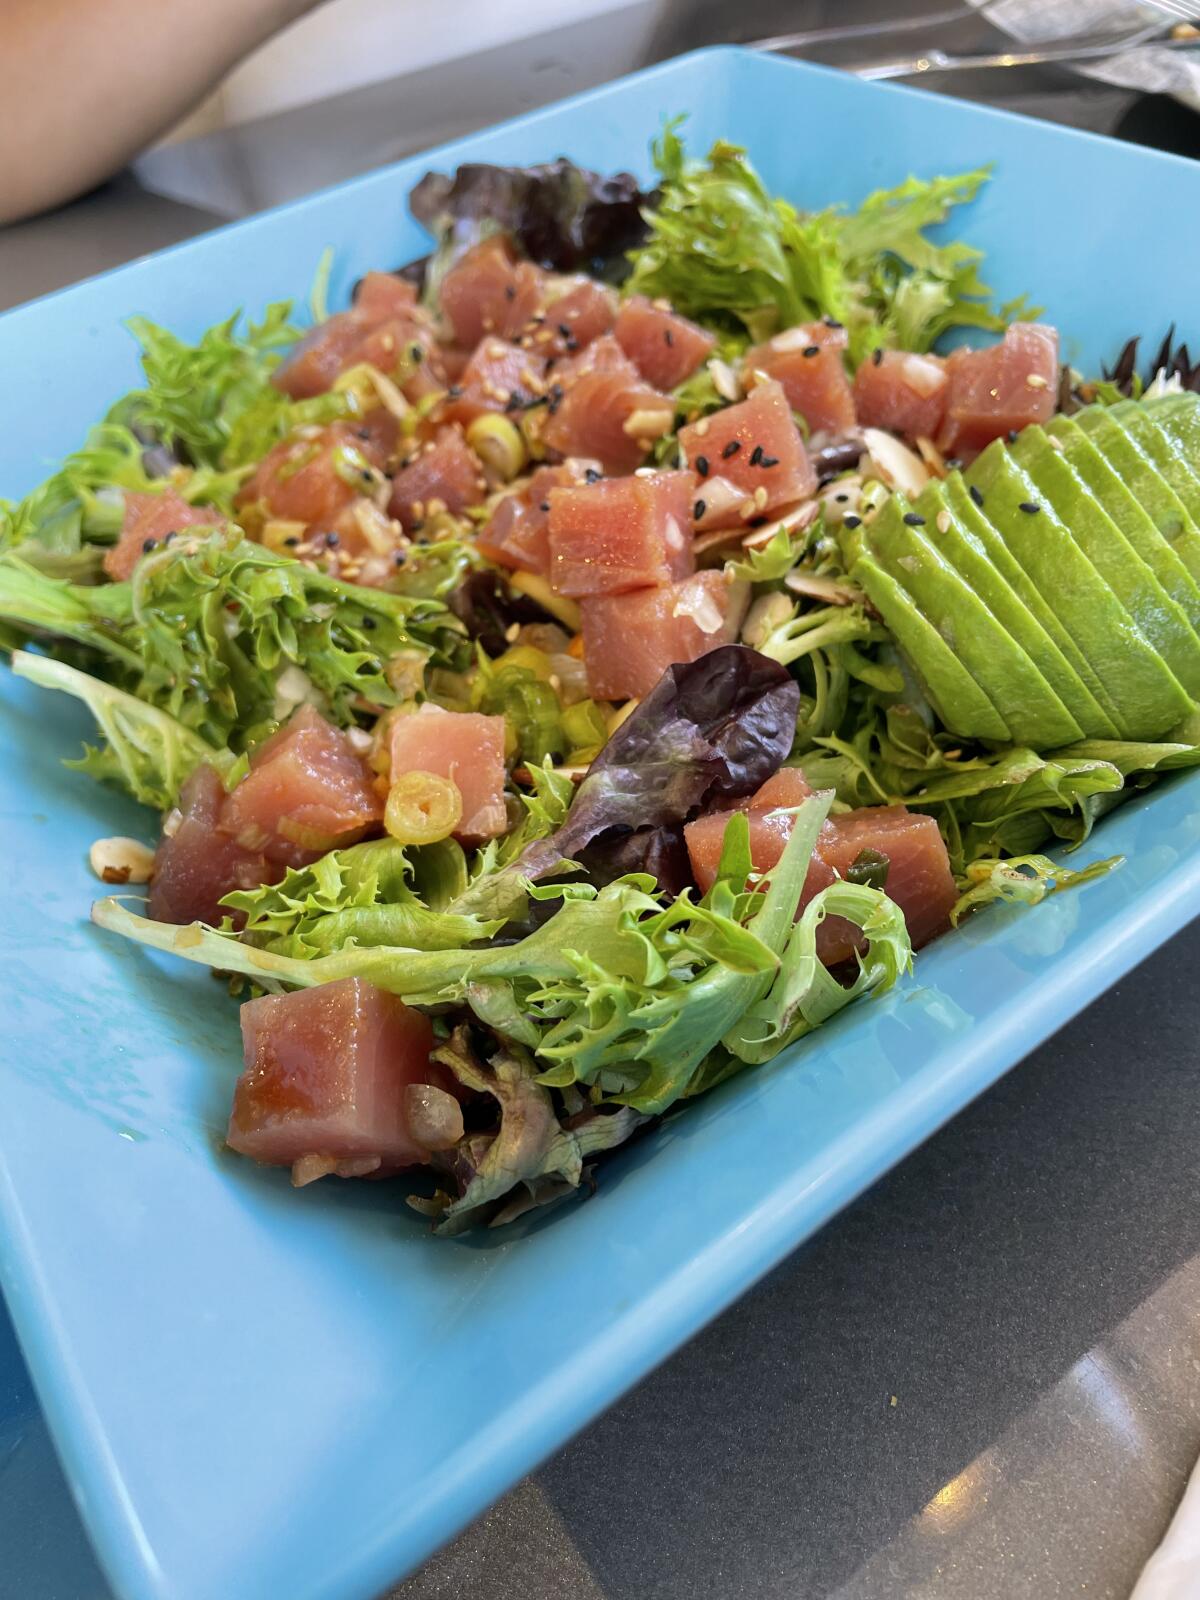 A refreshing and filling poke salad is just one of a sea of offerings on Simply Fish’s menu.